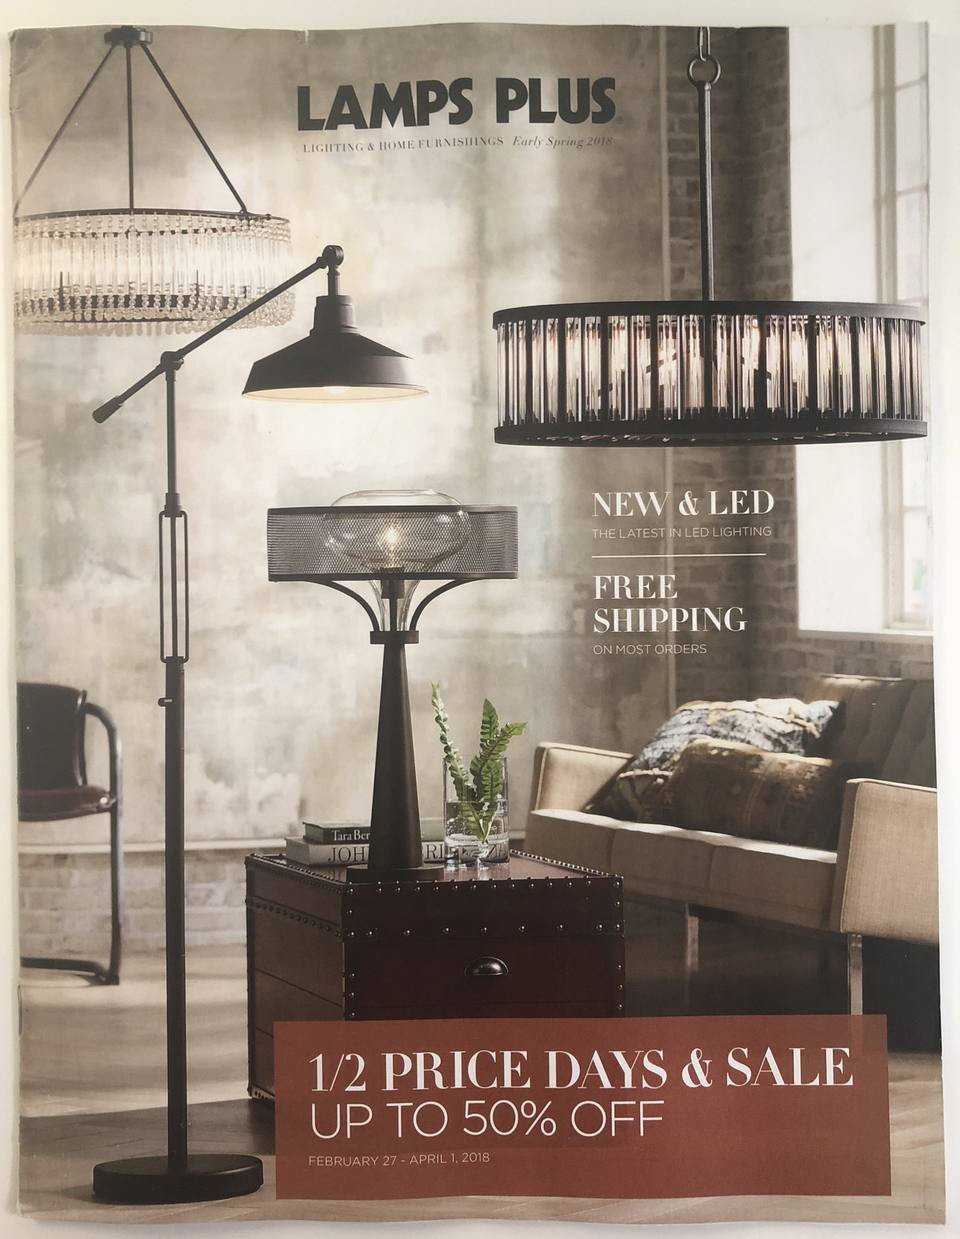 Catalogs by Mail Home Decor Lovely 29 Free Home Decor Catalogs You Can Get In the Mail